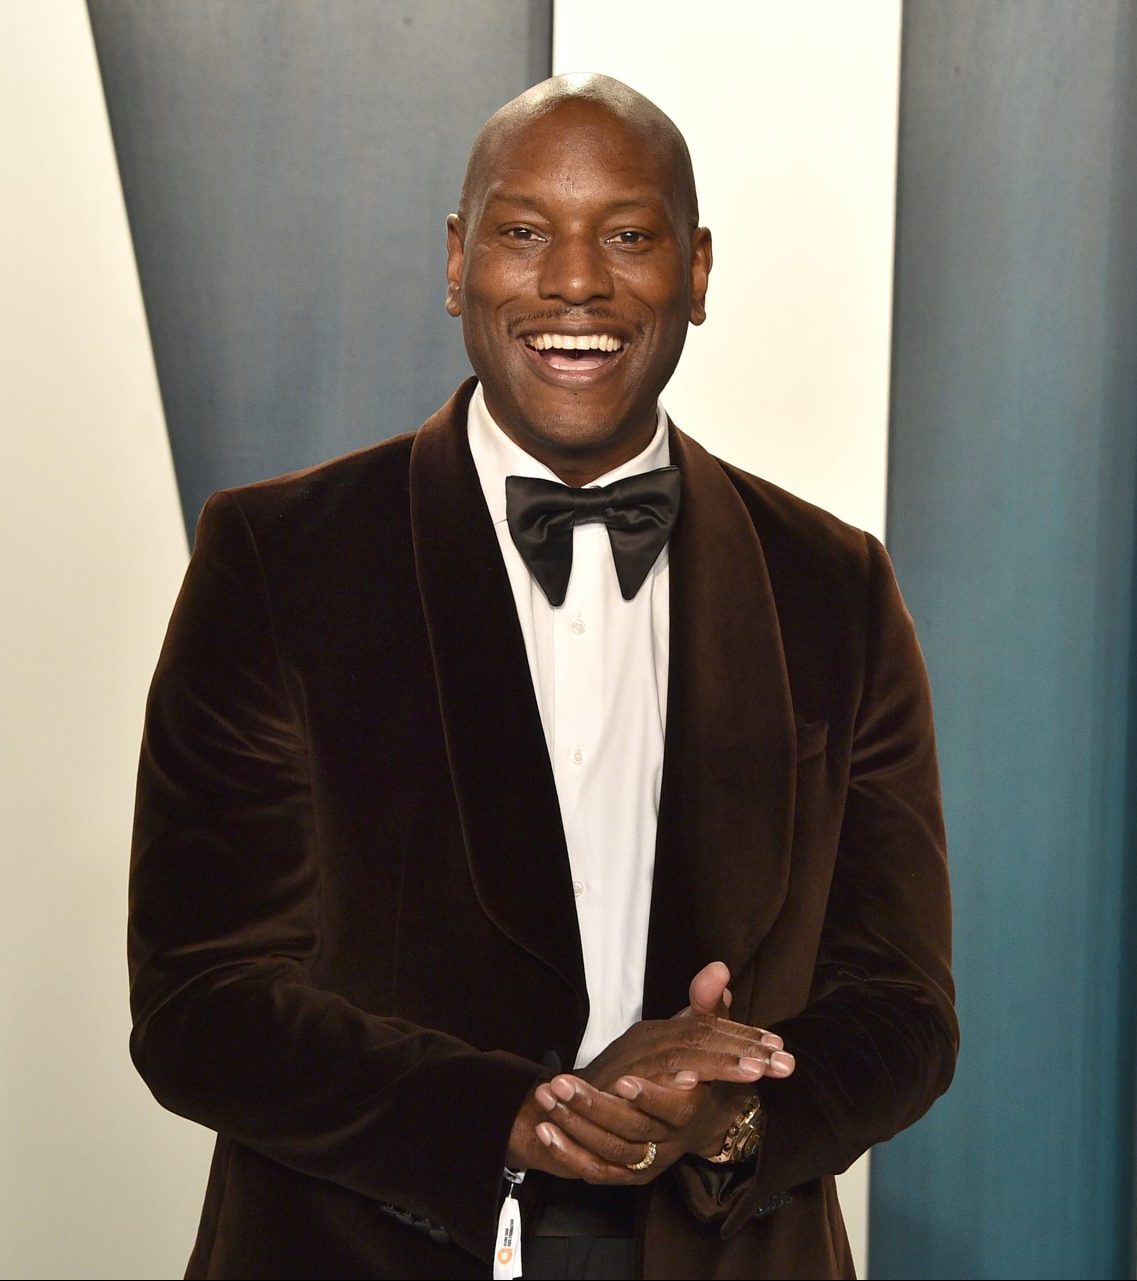 Tyrese Responds To Ex-Girlfriend Zelie Timothy With Lengthy Instagram Message—“Me And My Girl Done Jumped Out There And Broke Up”